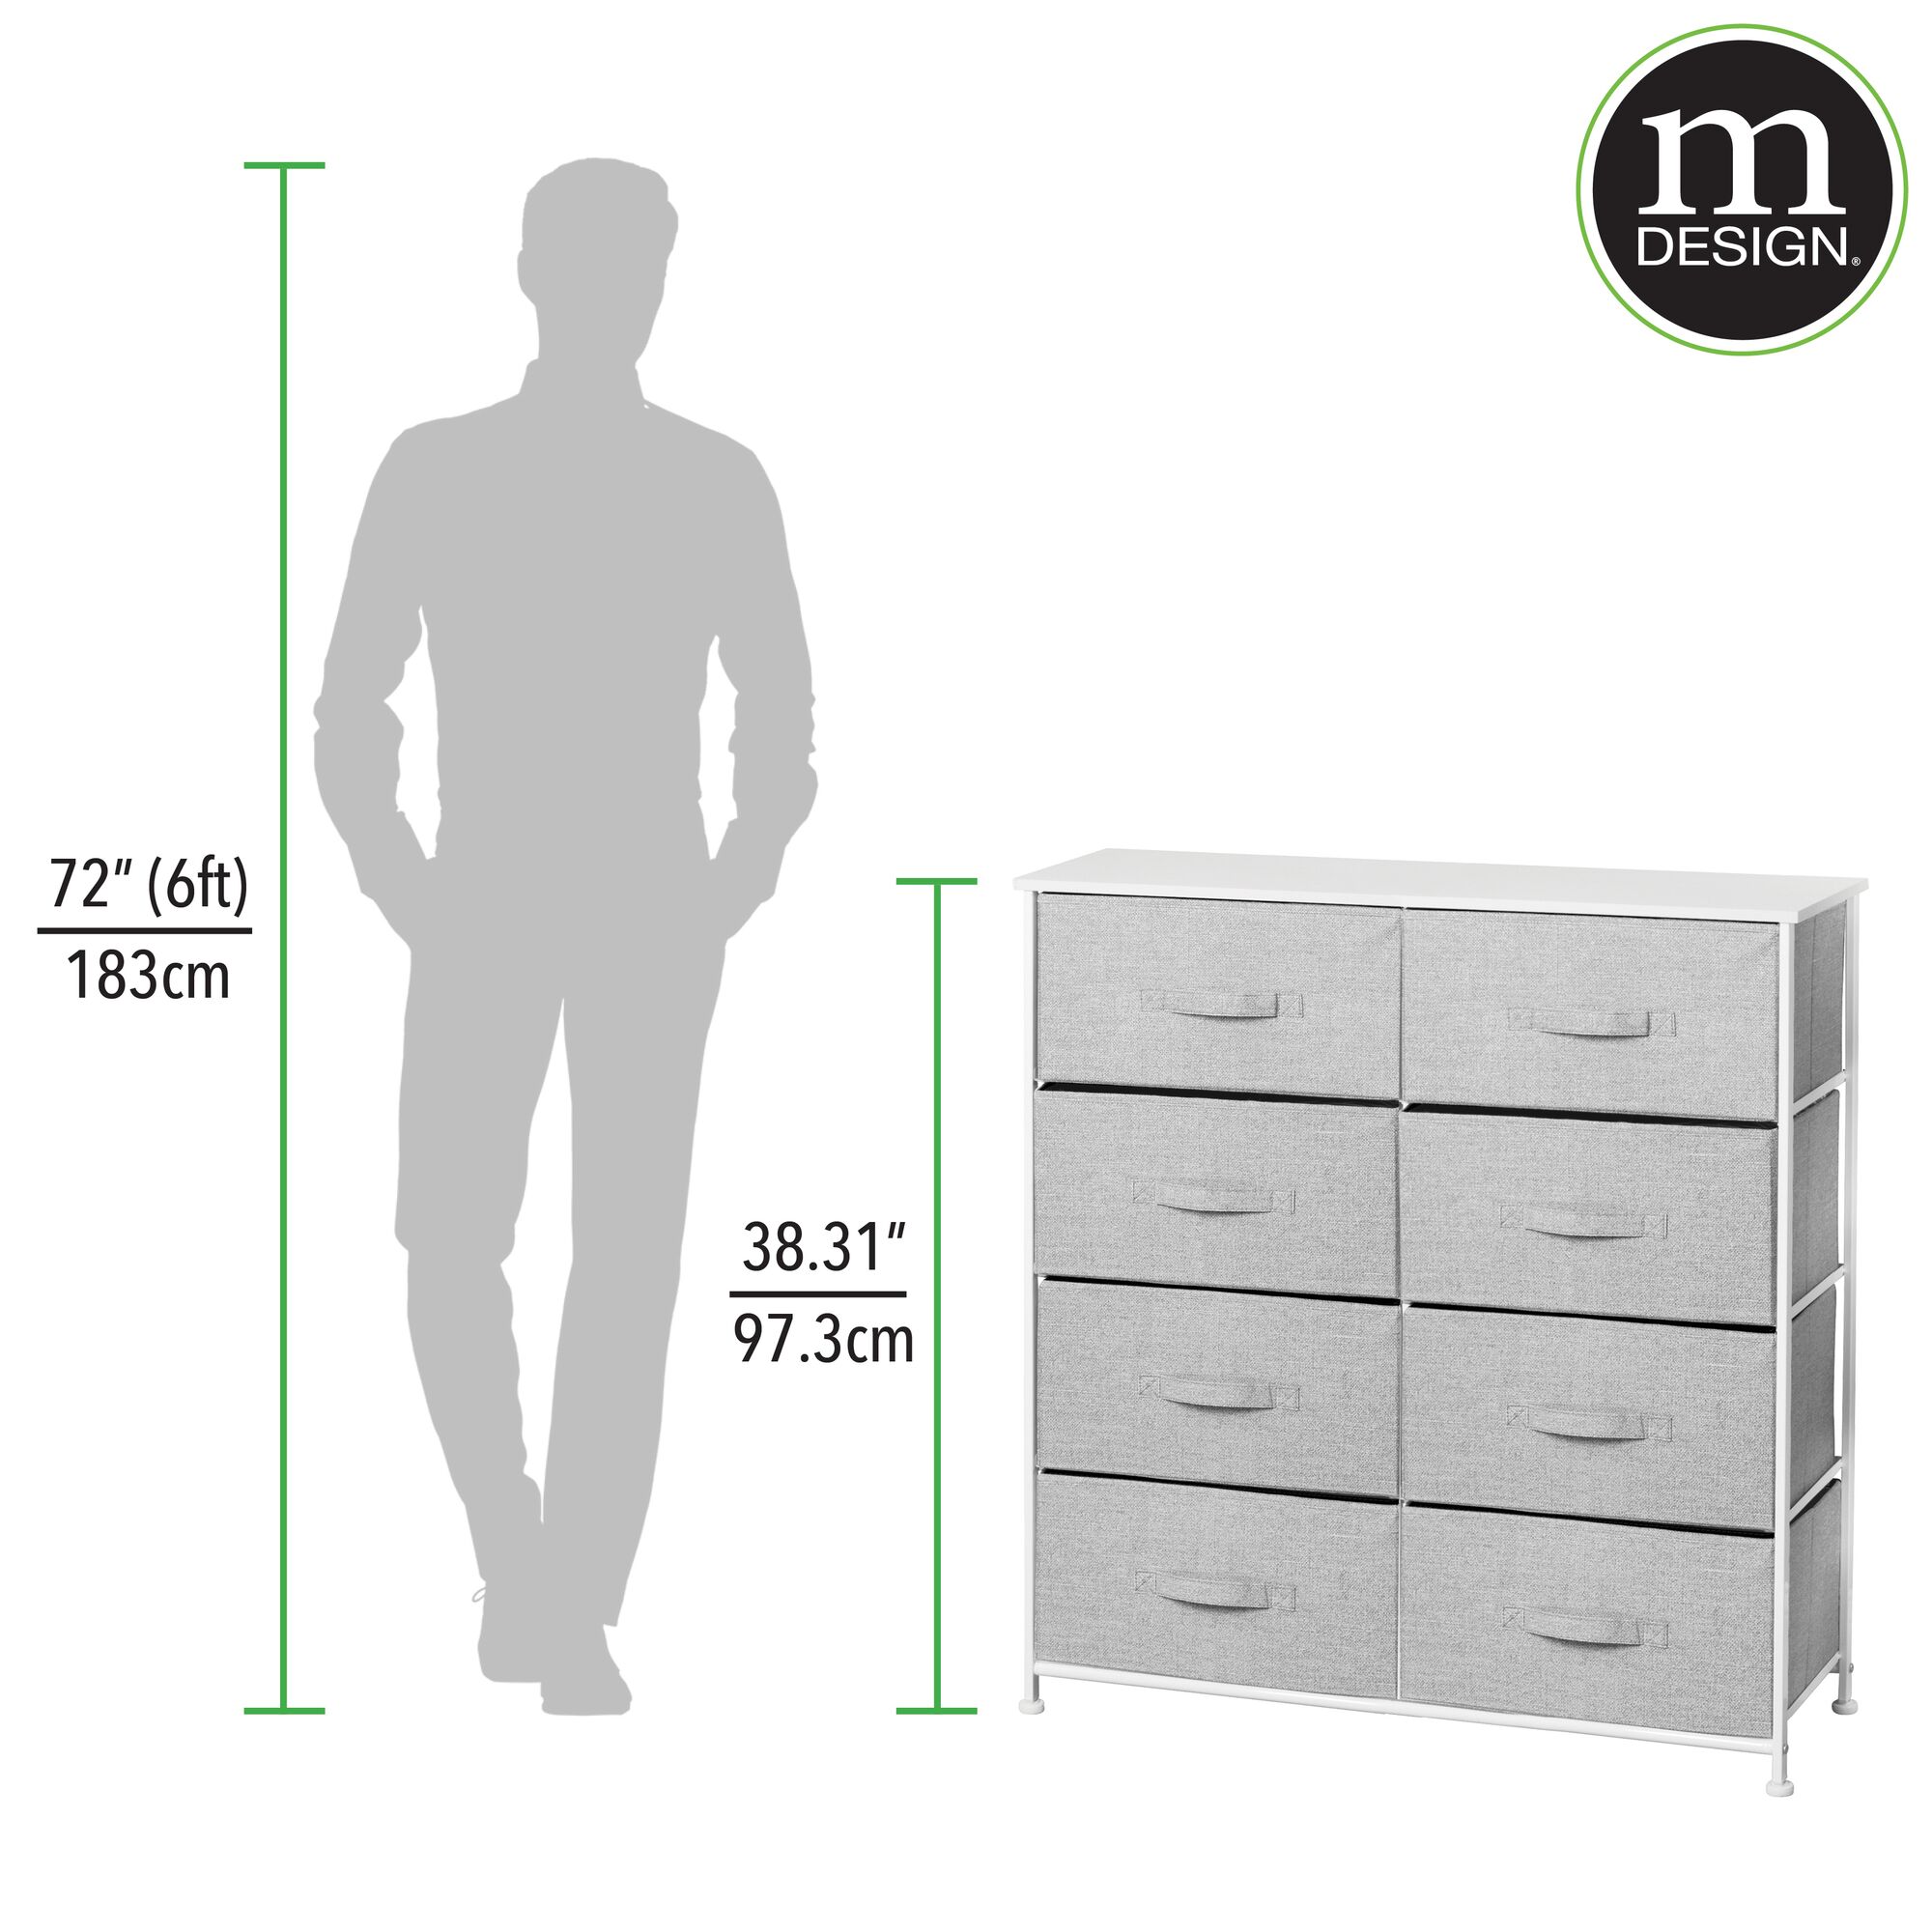 mDesign Large Storage Dresser Furniture with 8 Removable Fabric Drawers, Gray - image 4 of 6